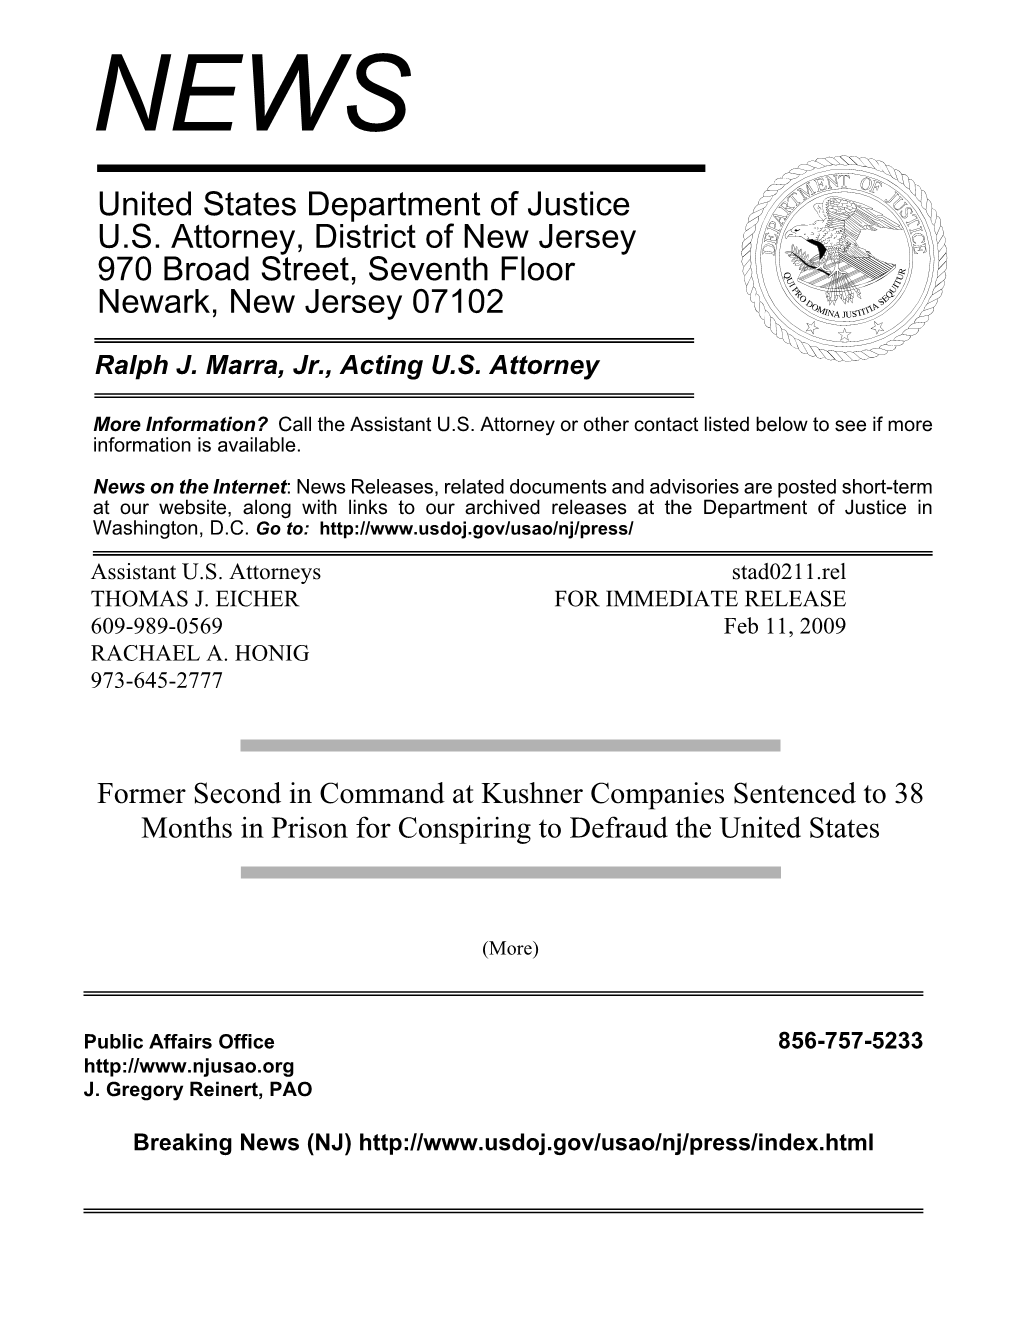 United States Department of Justice U.S. Attorney, District of New Jersey 970 Broad Street, Seventh Floor Newark, New Jersey 07102